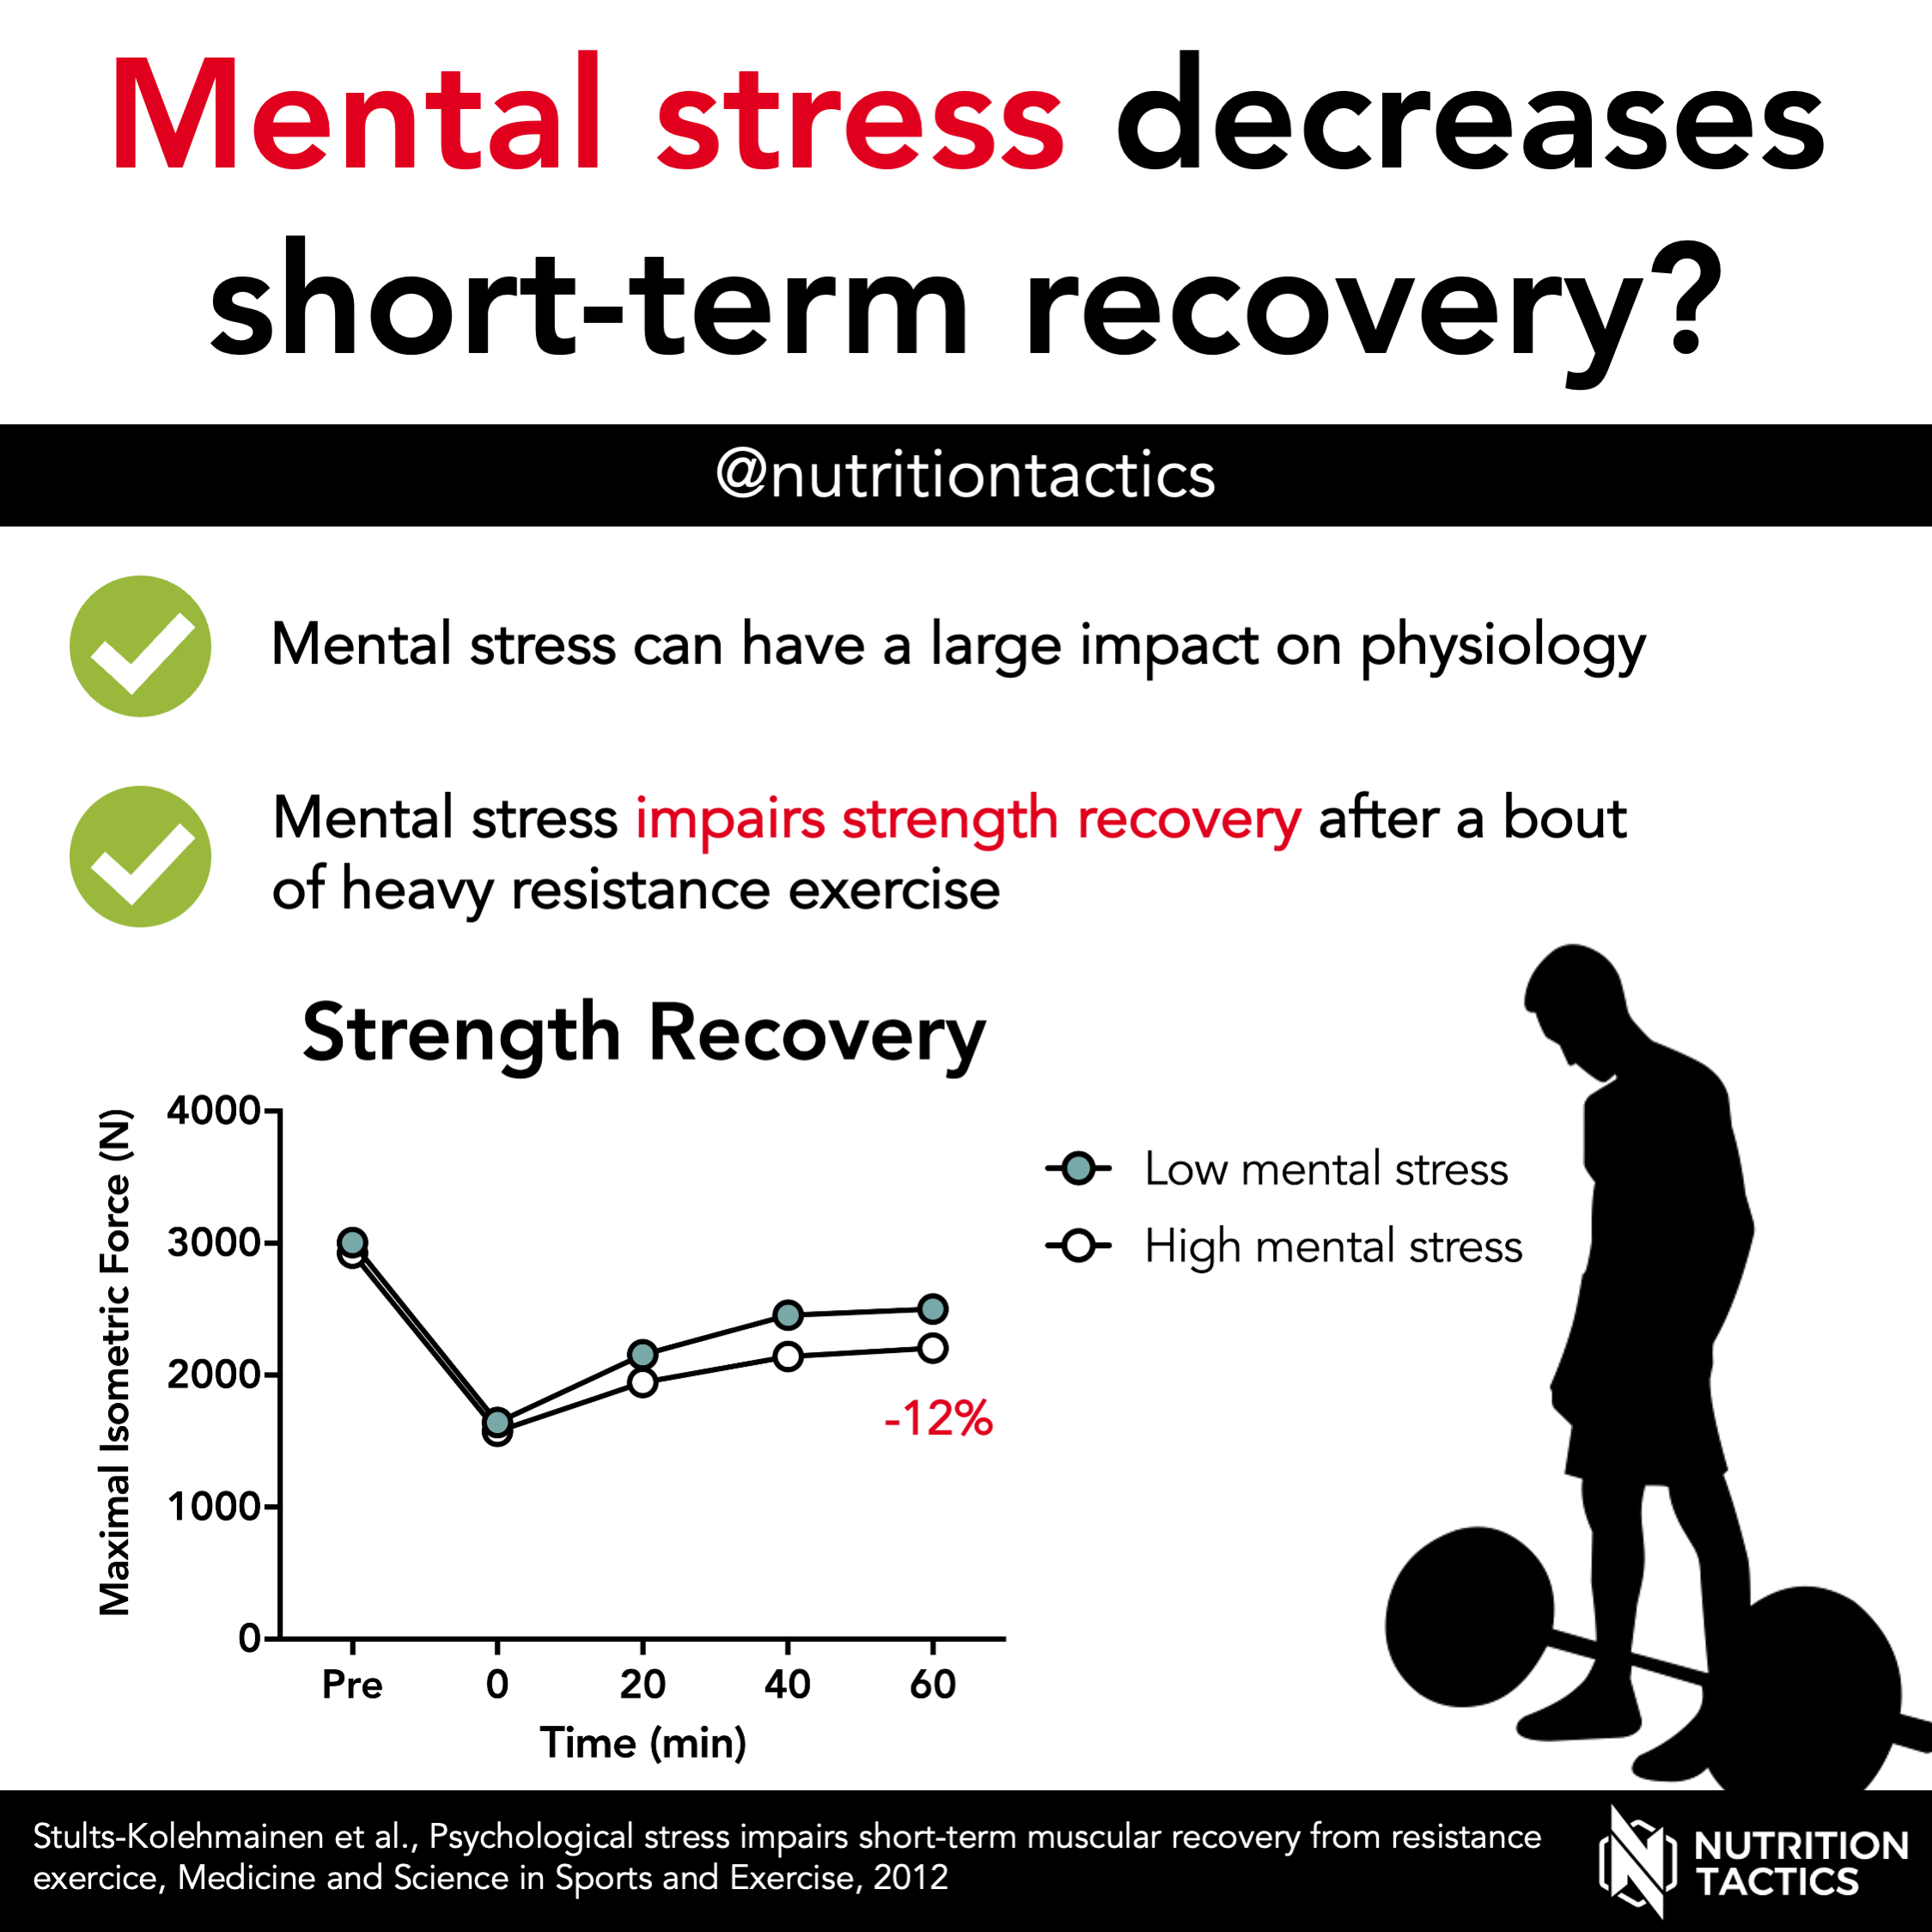 Mental stress decreases recovery?